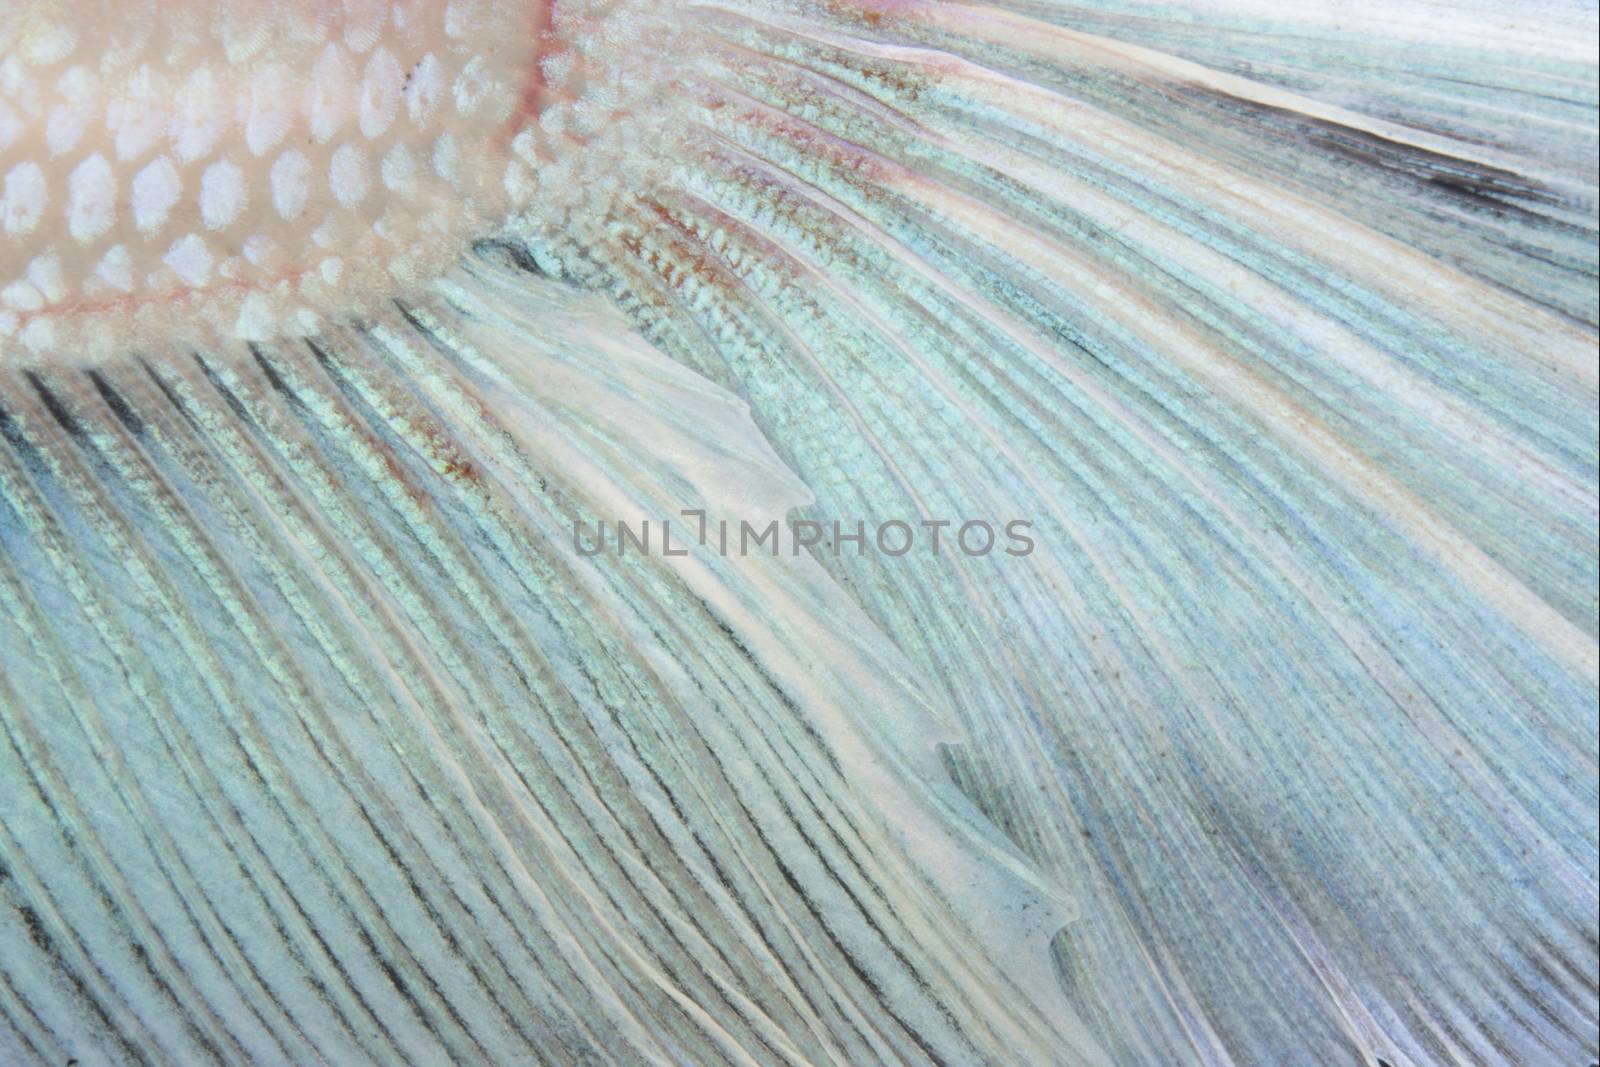 Nature colorful texture, tail of betta siamese fighting fish